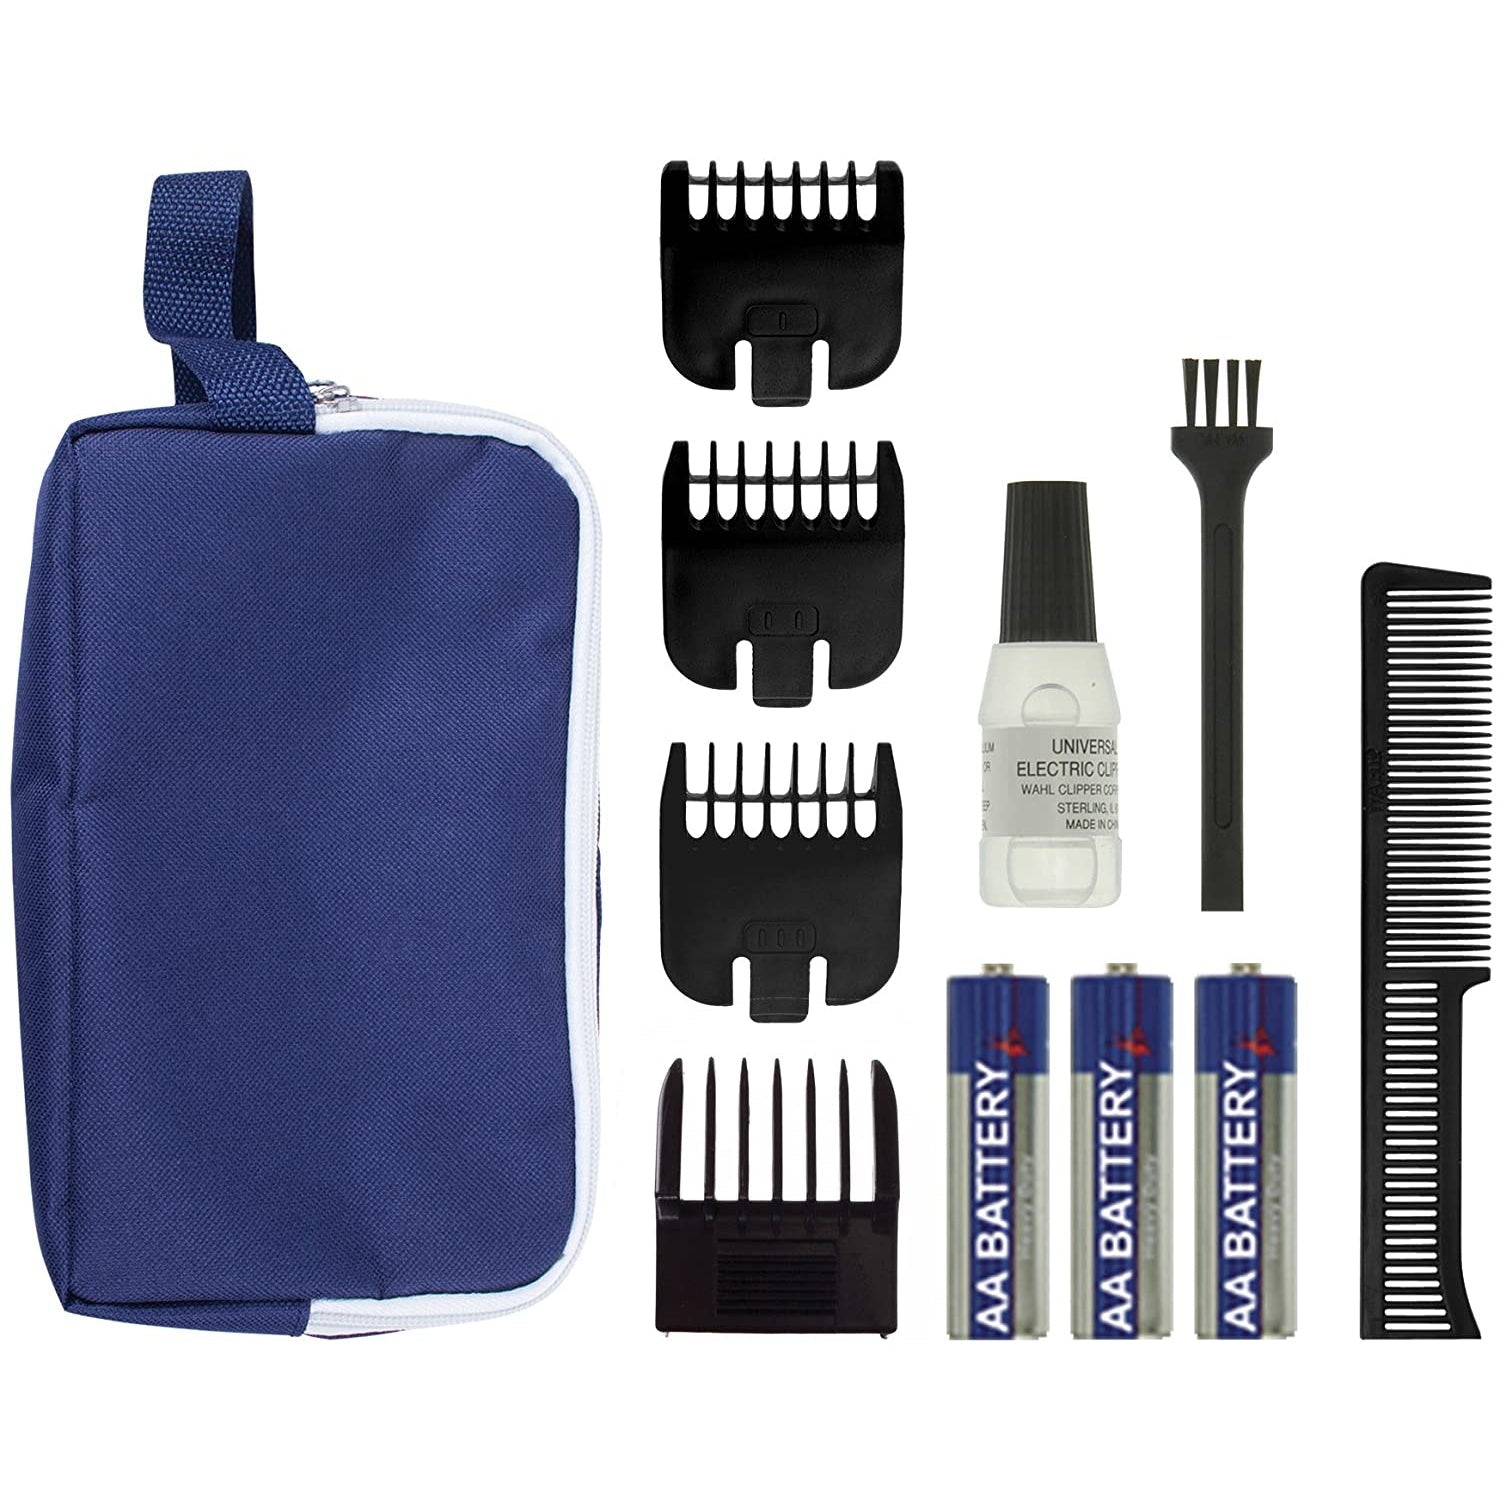 Wahl GroomEase Trimmer Gift Set - 11 Piece Kit - Healthxpress.ie